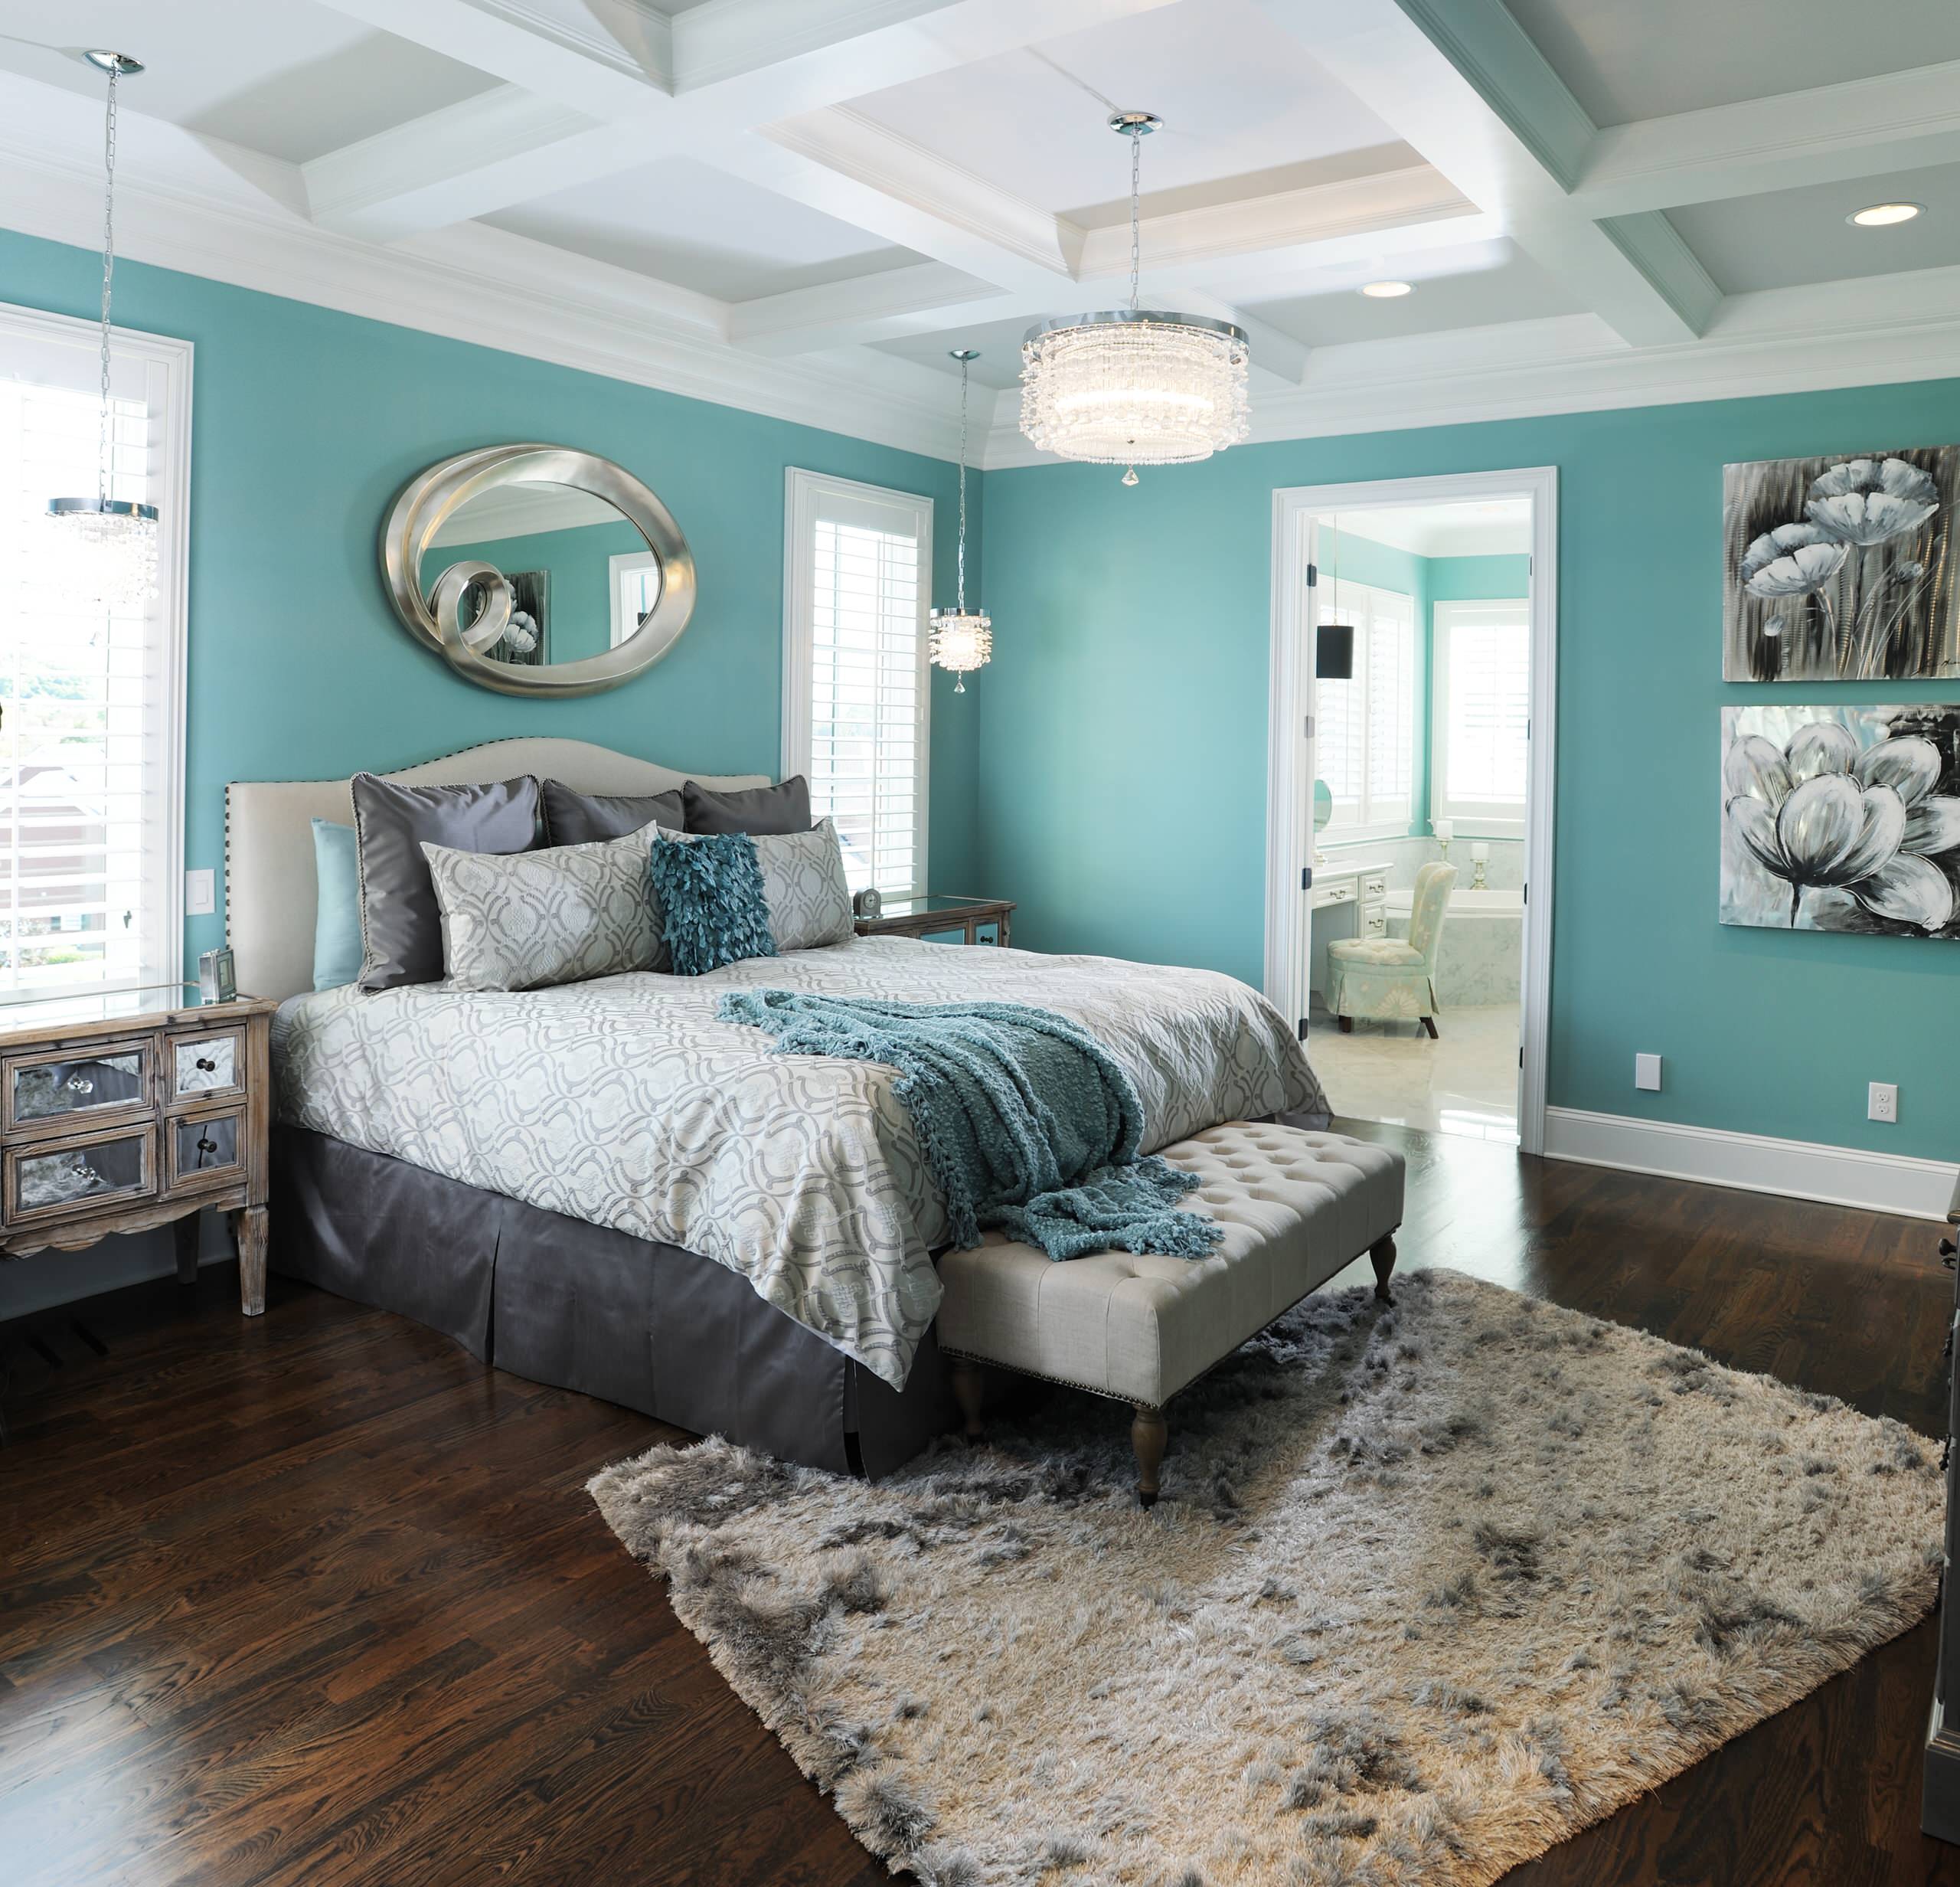 Gorgeous grey and teal bedroom Turquoise And Gray Bedroom Ideas Photos Houzz